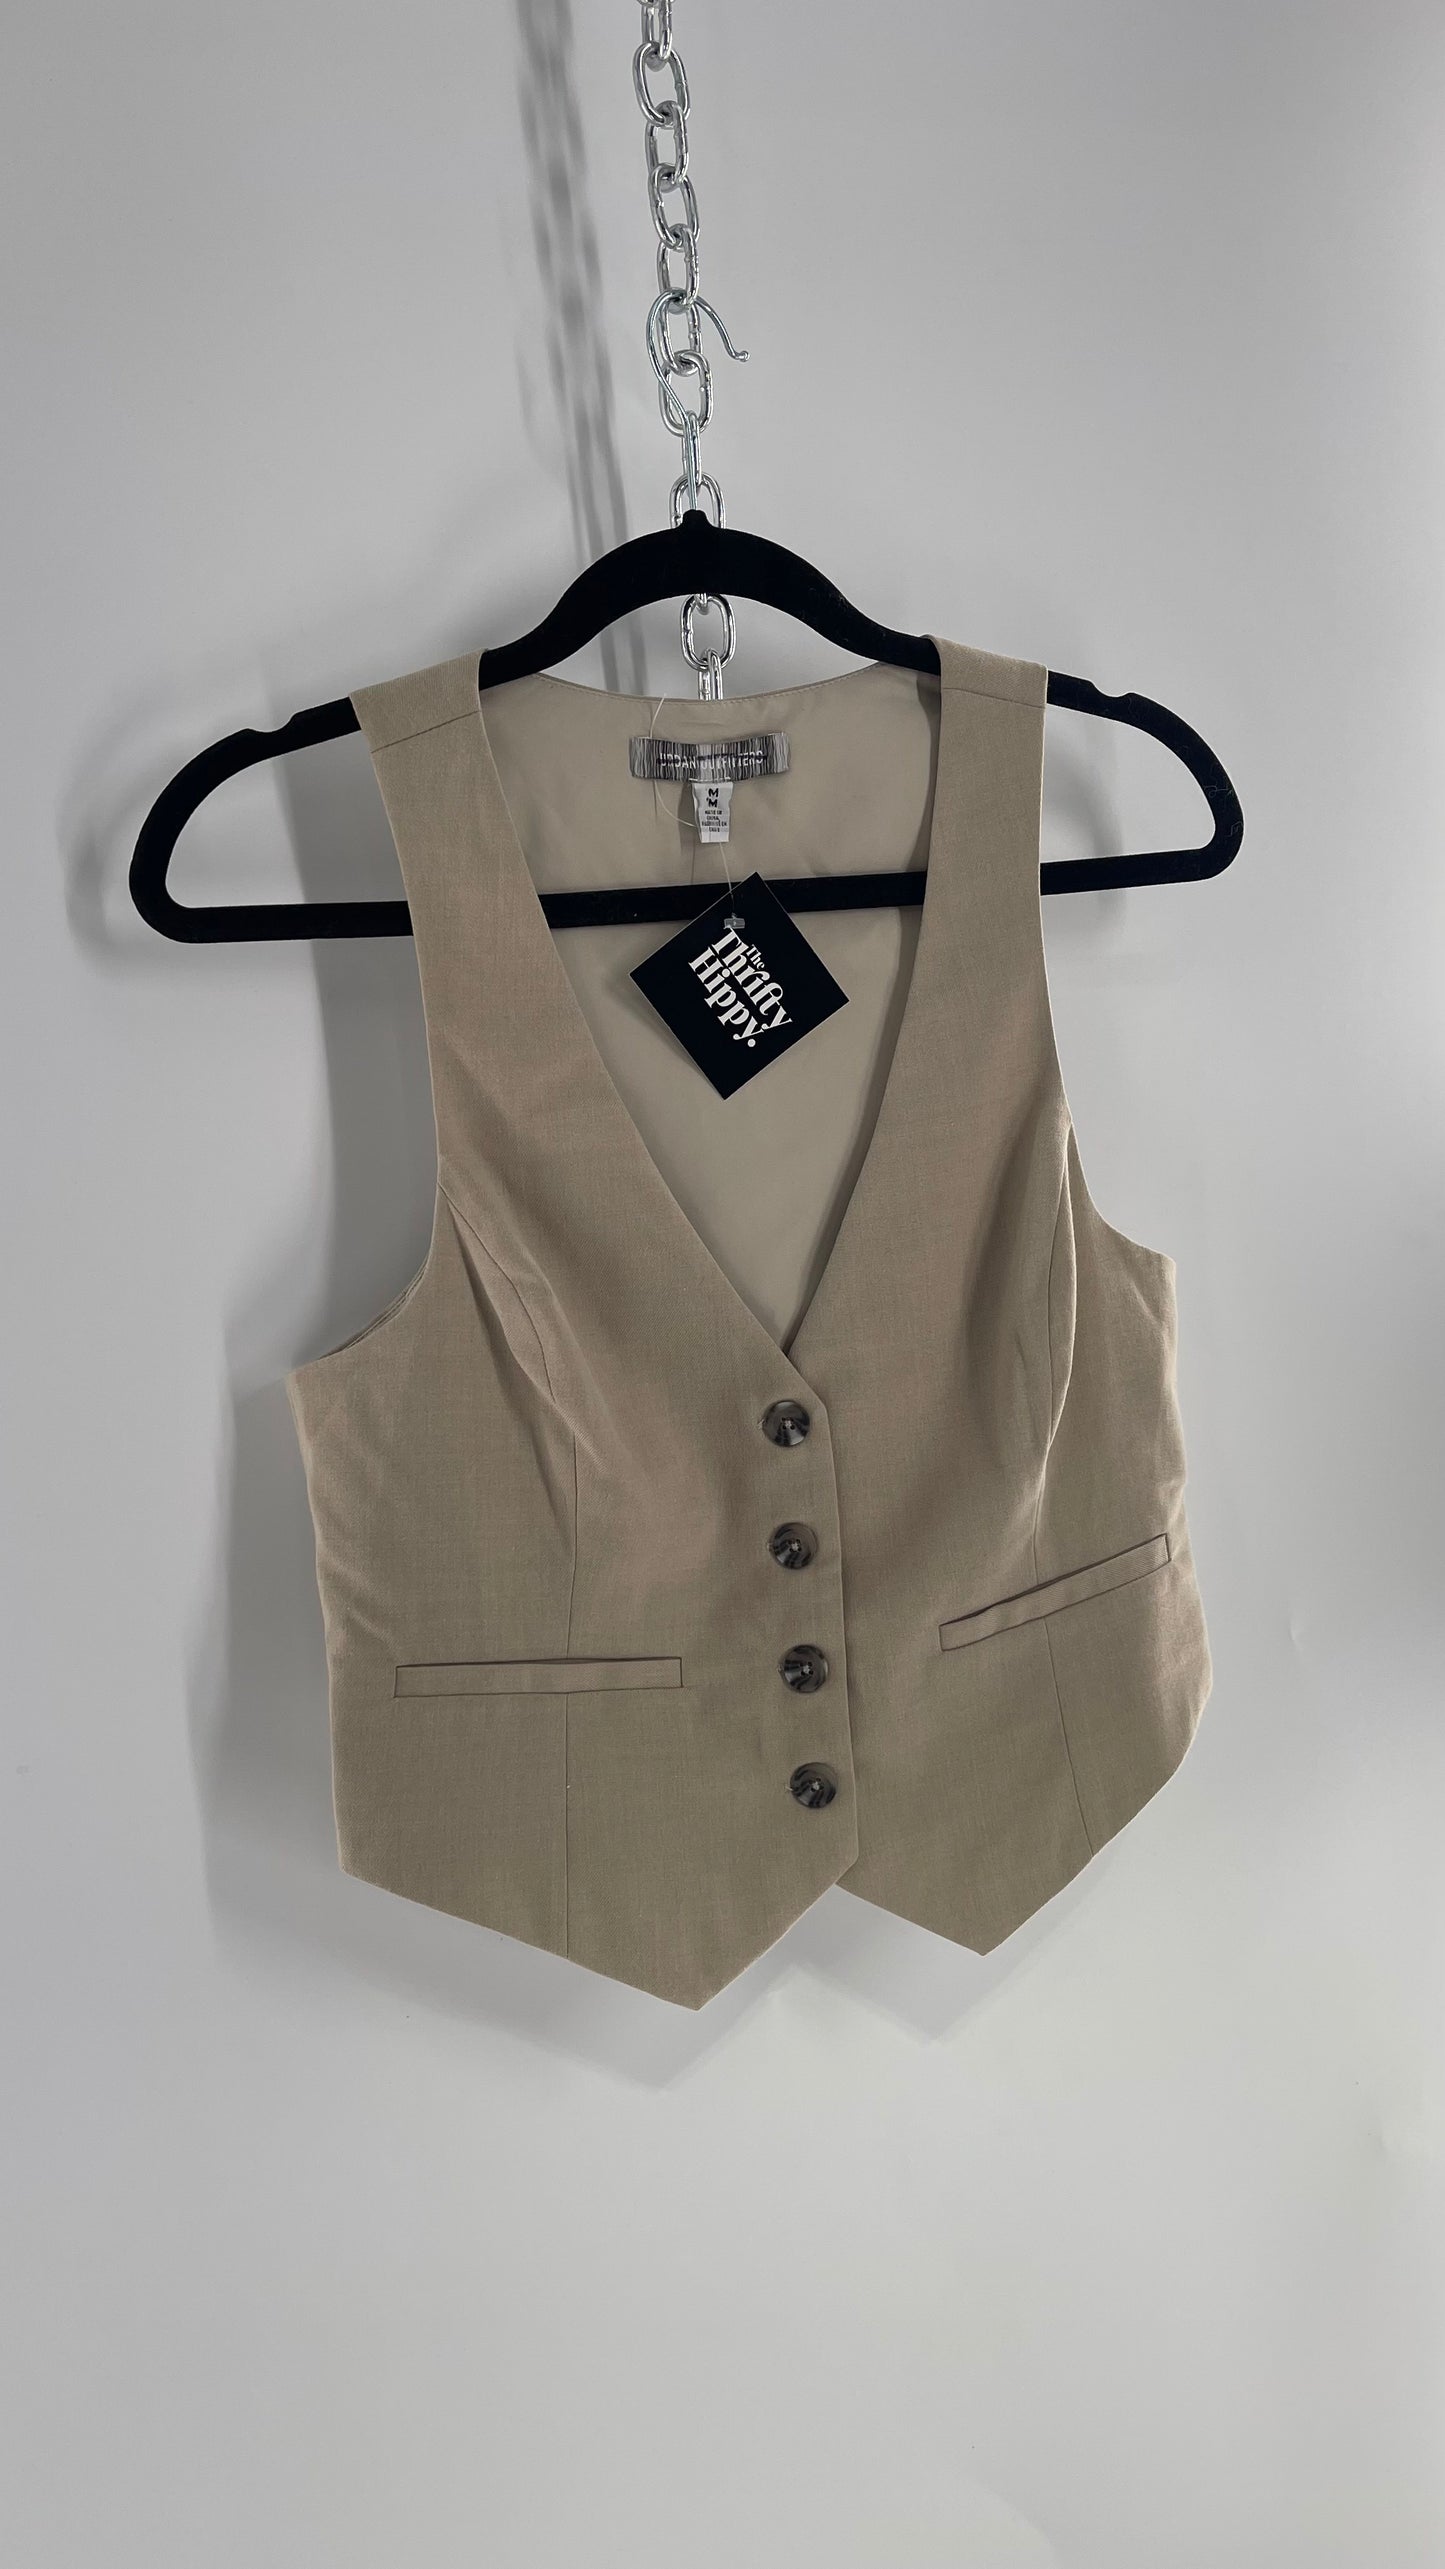 Urban Outfitters Vintage Upcycled Tan\Grey Cropped Vest Top (Medium)